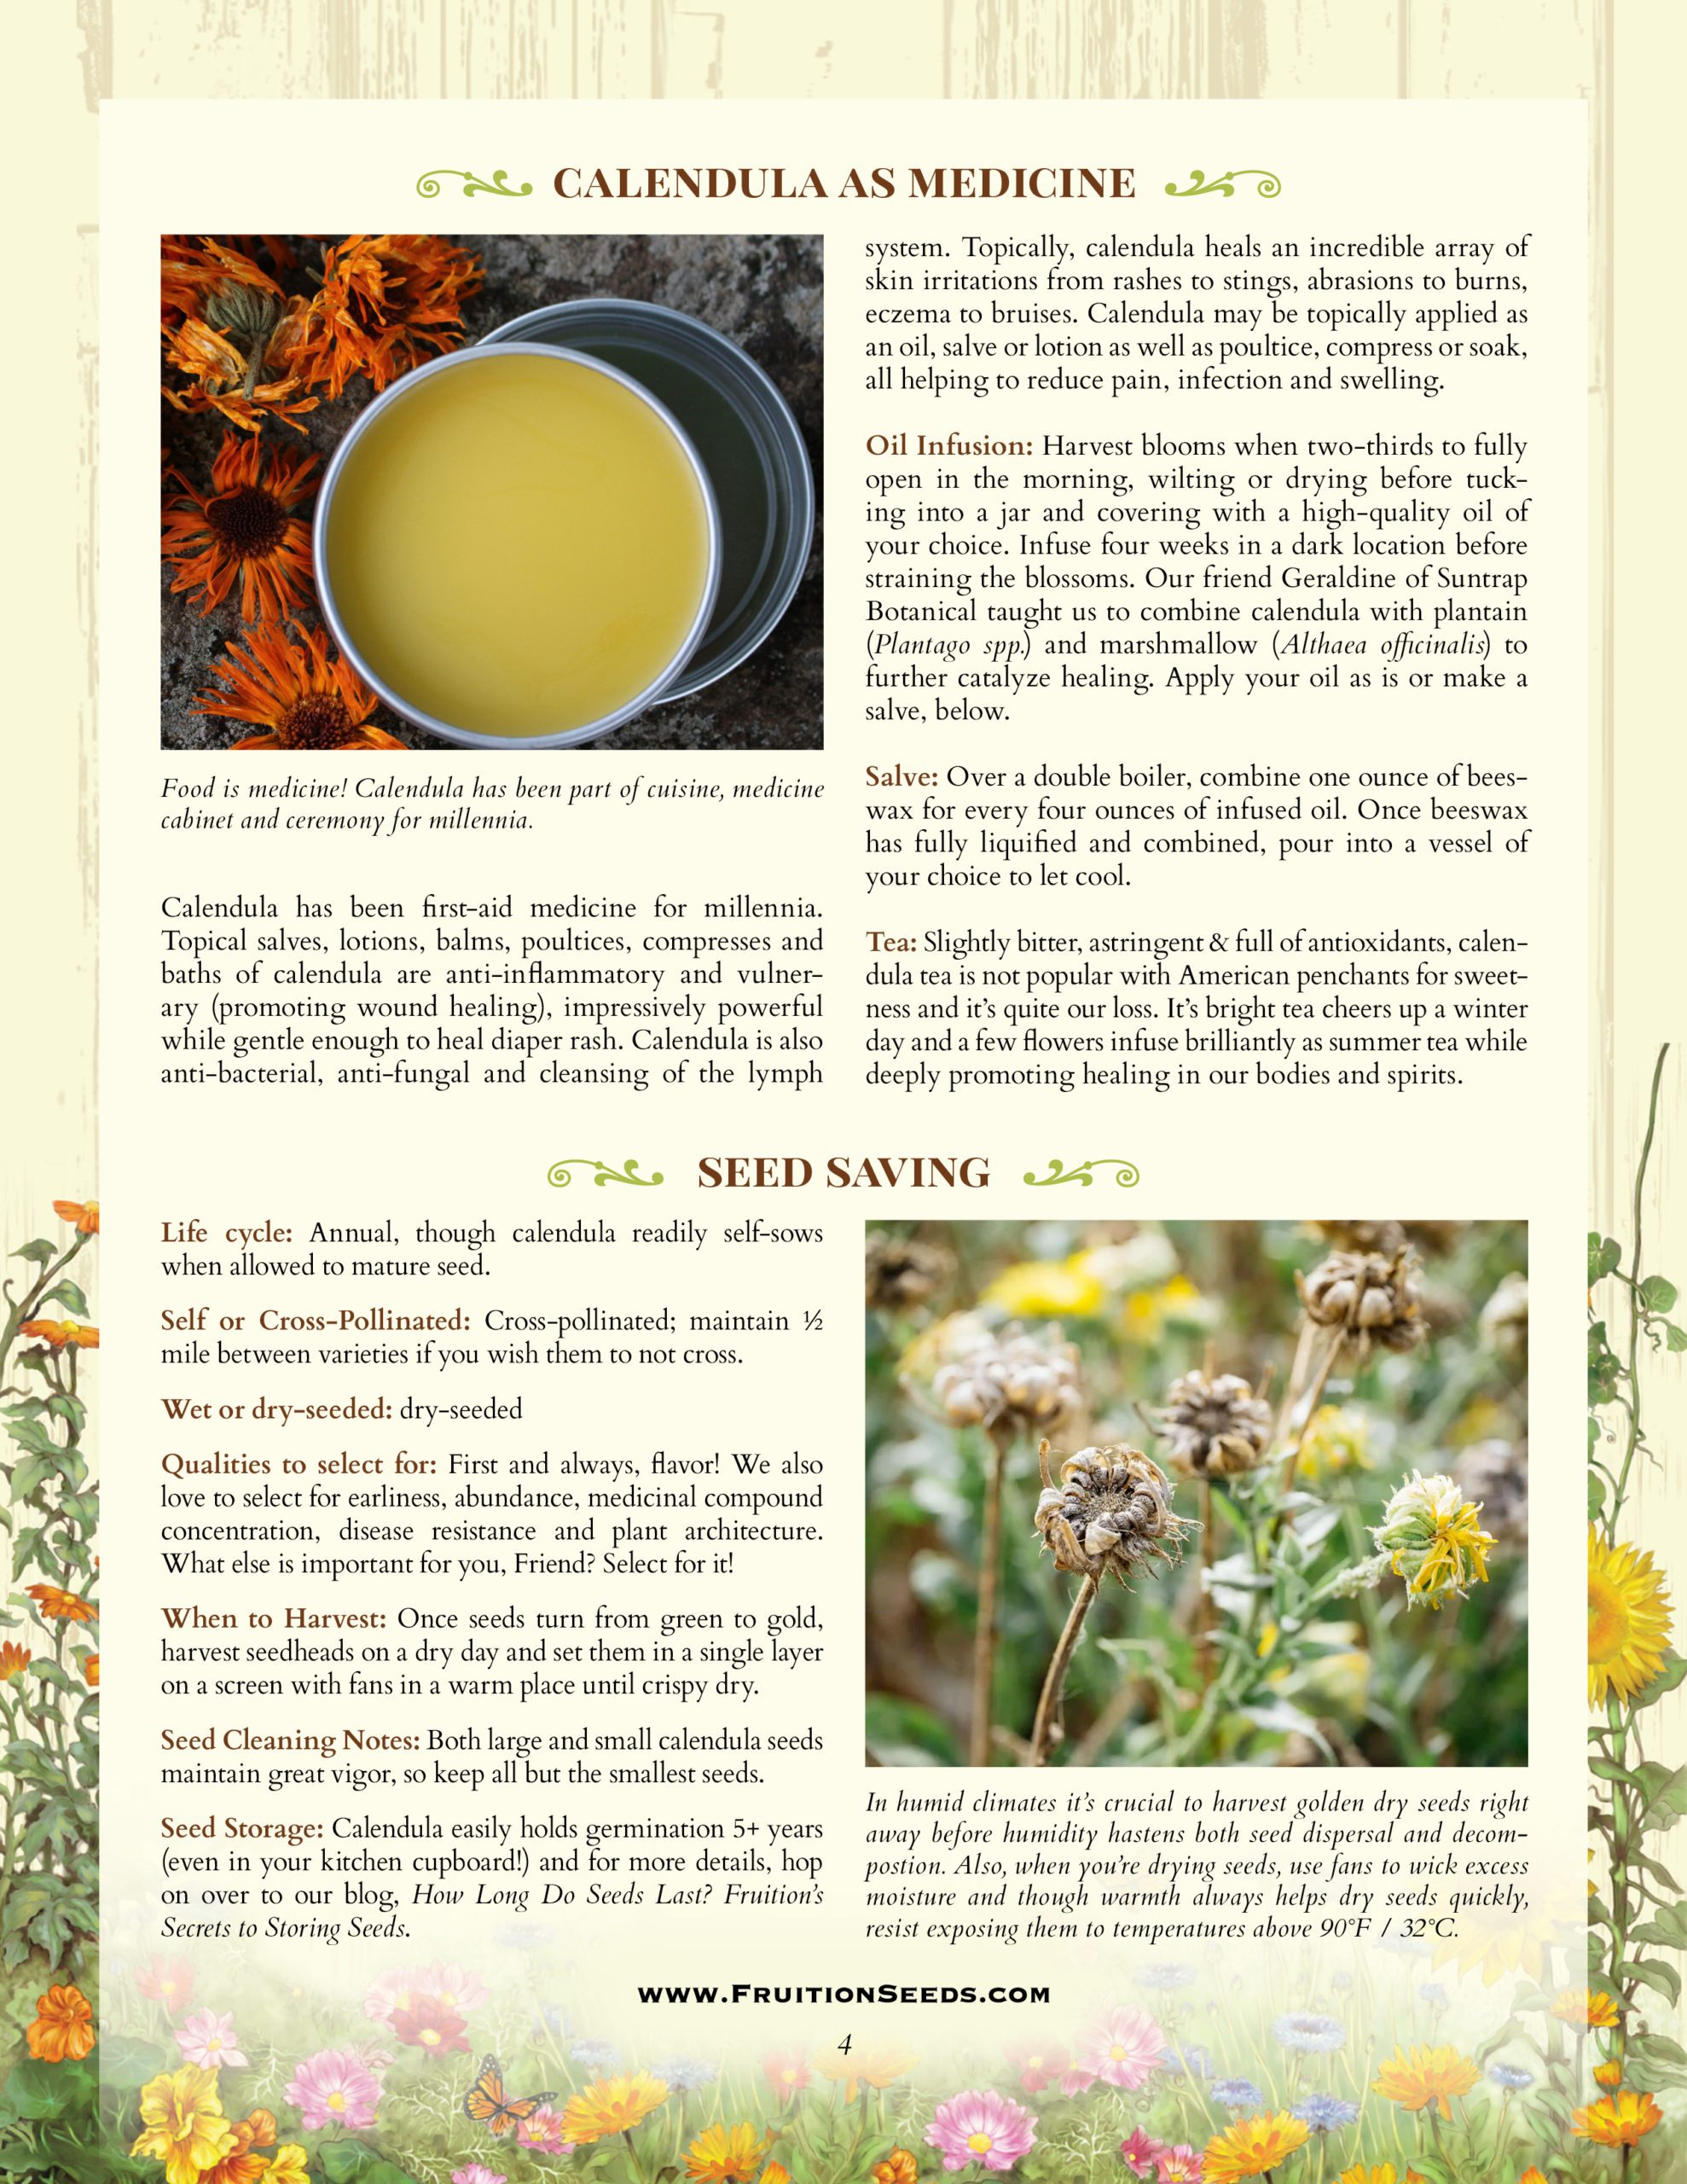 Thumbnail of Growing Guide for Companion Planting